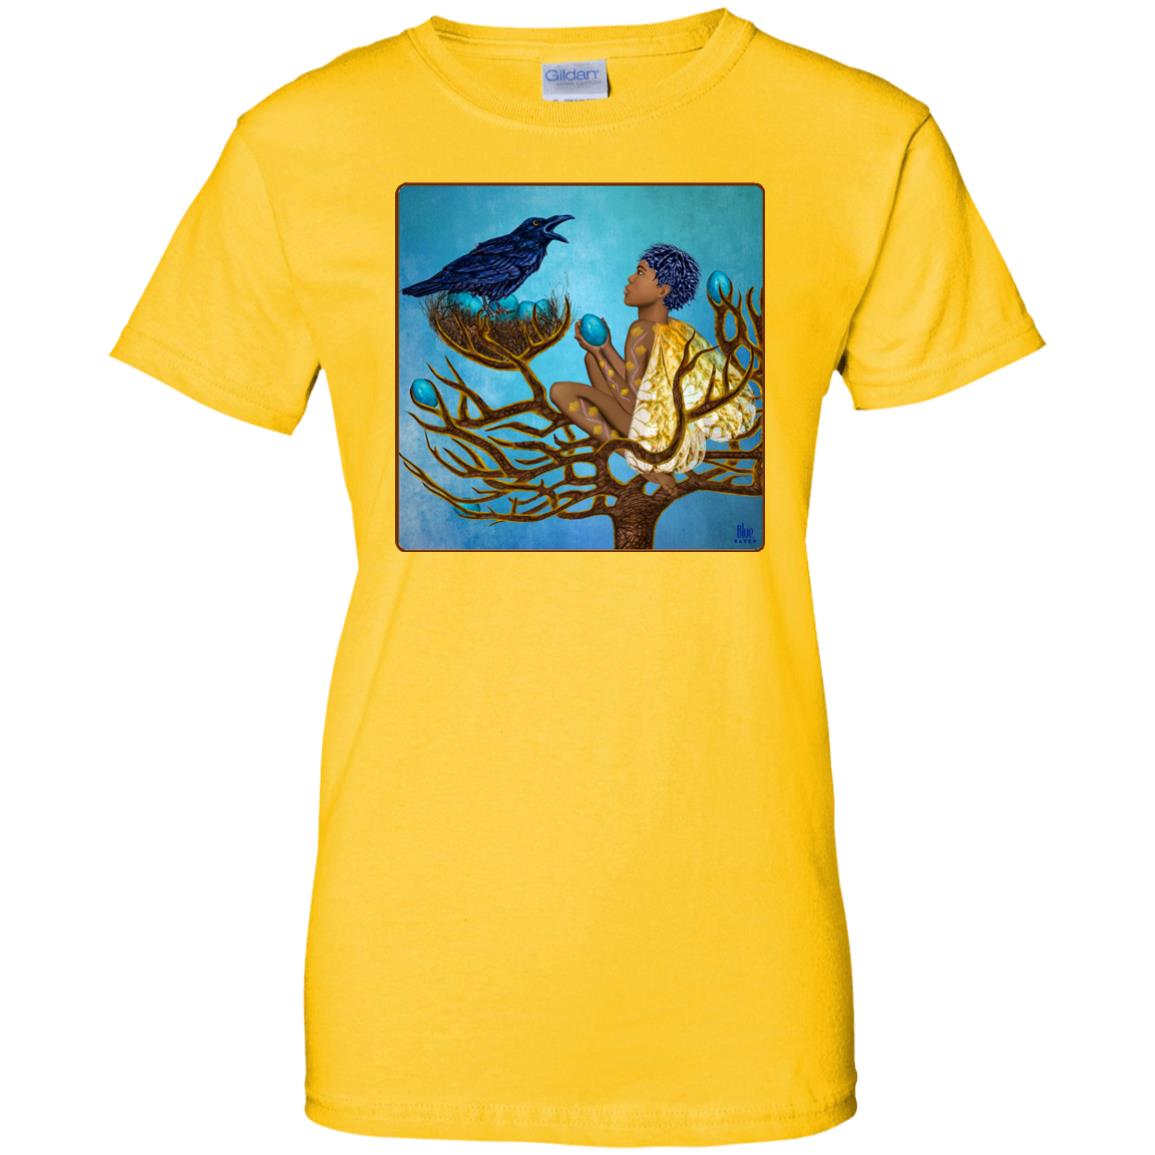 The blue raven's friend - Women's Relaxed Fit T-Shirt